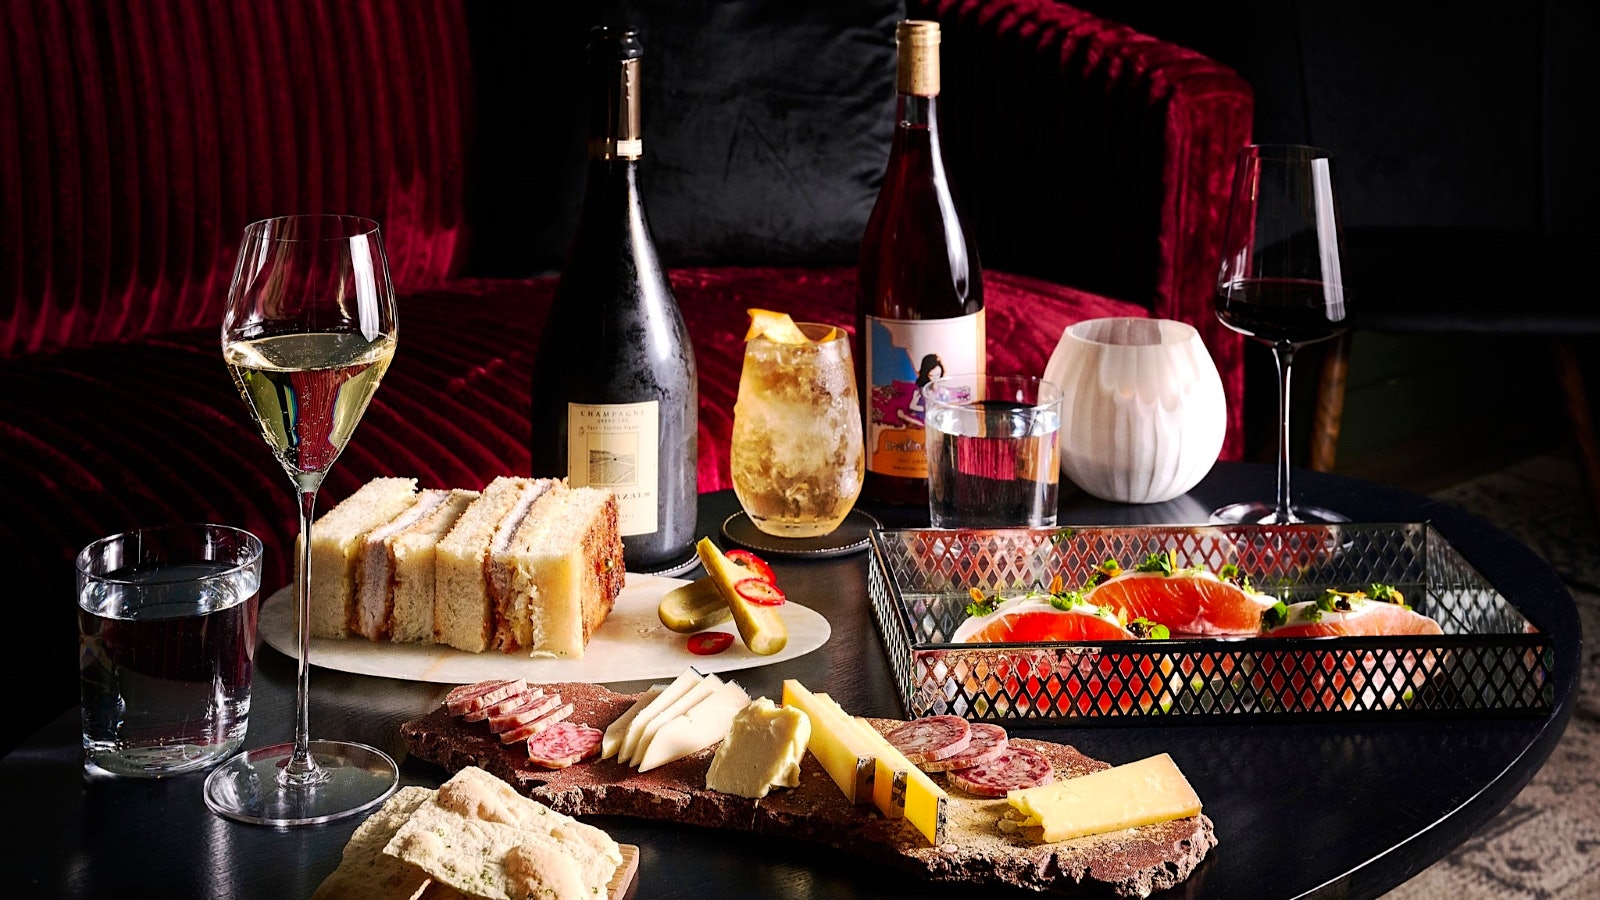  A table with red and white wine, displayed in bottles and poured in two glasses, alongside cocktails, finger sandwhiches and charcuterie boards.